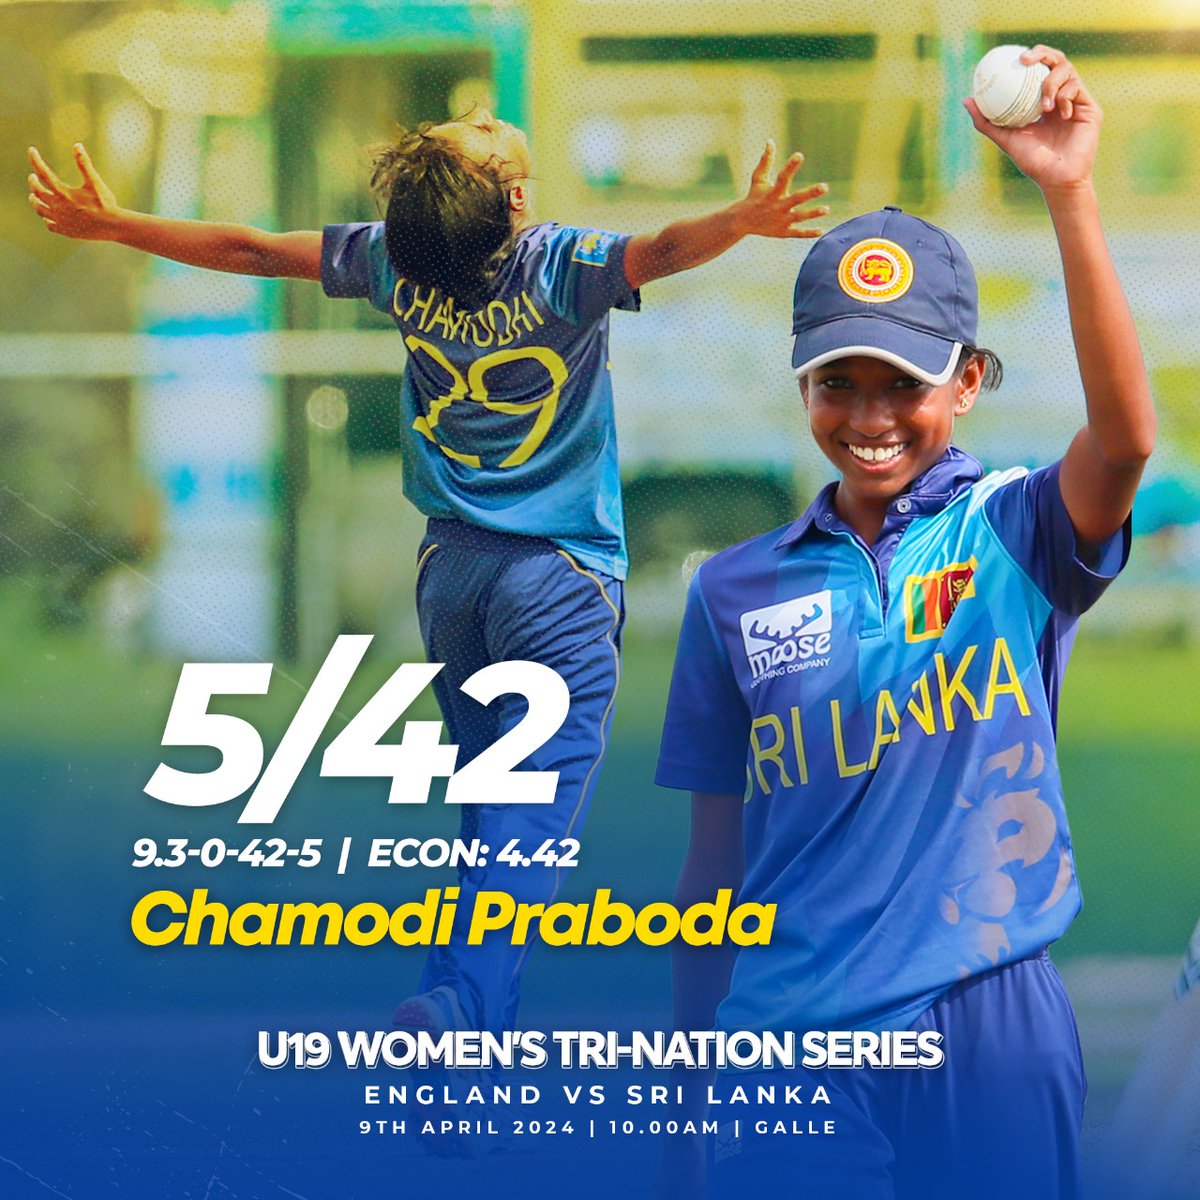 A star is born! ⭐

Chamodi Praboda destroyed England's innings by taking a fifer (5/42) and brings a glorious victory to the #SriLankaU19 Women's team!

 #U19TriSeries #SLvENG #RisingStar